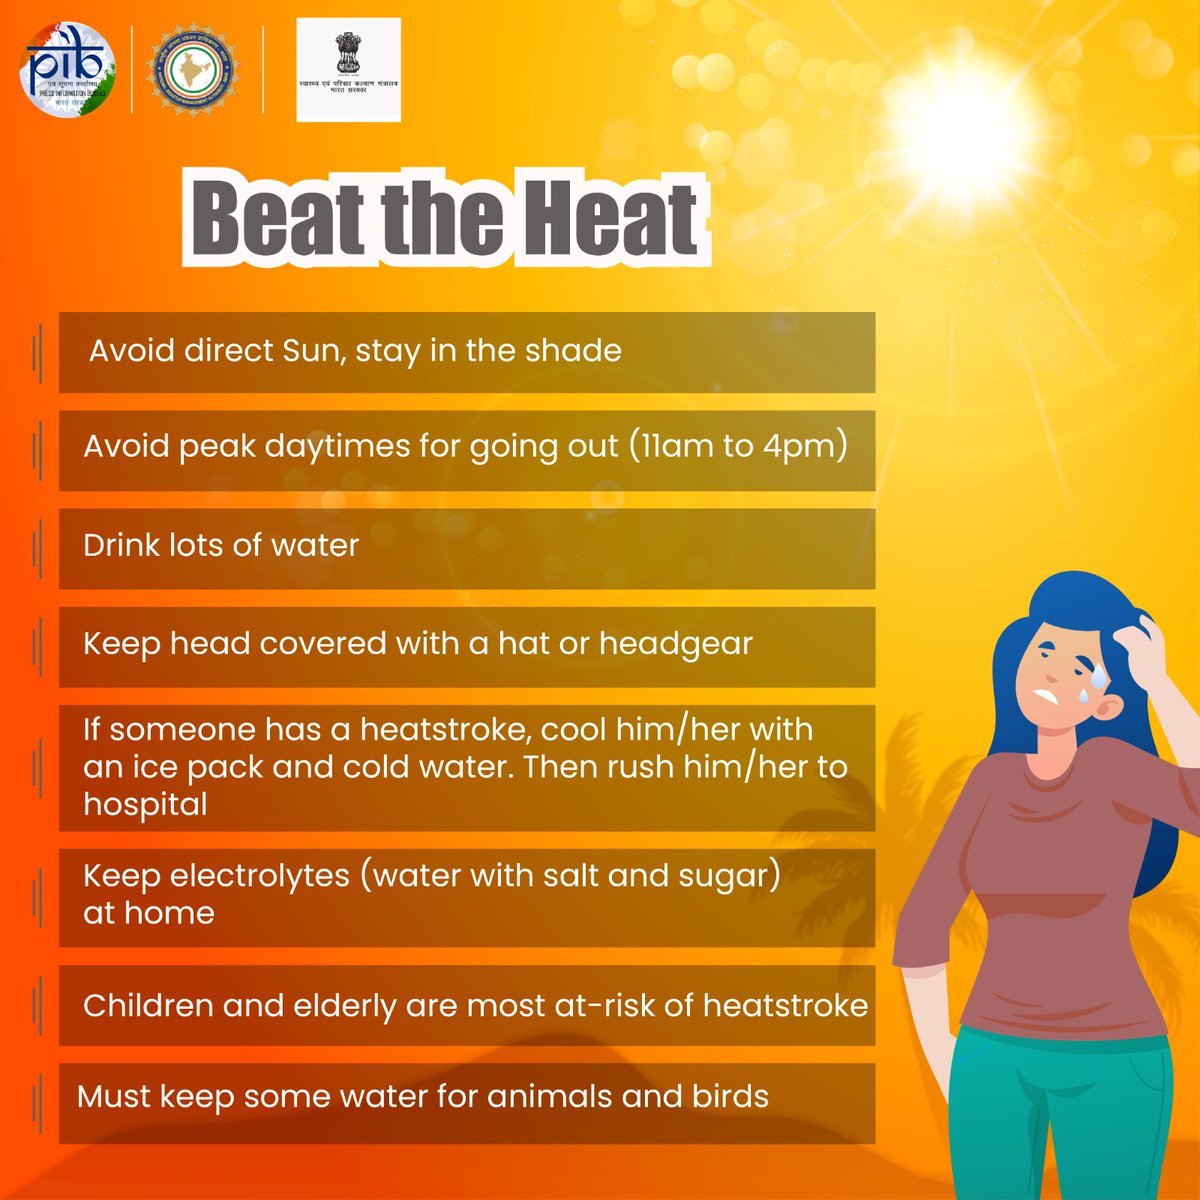 #BeatTheHeat with simple measures during this summer season! 🔹Avoid direct sun, stay in the shade 🔹Avoid peak daytimes for going out (11am to 4pm) 🔹Drink lots of water #HeatWave